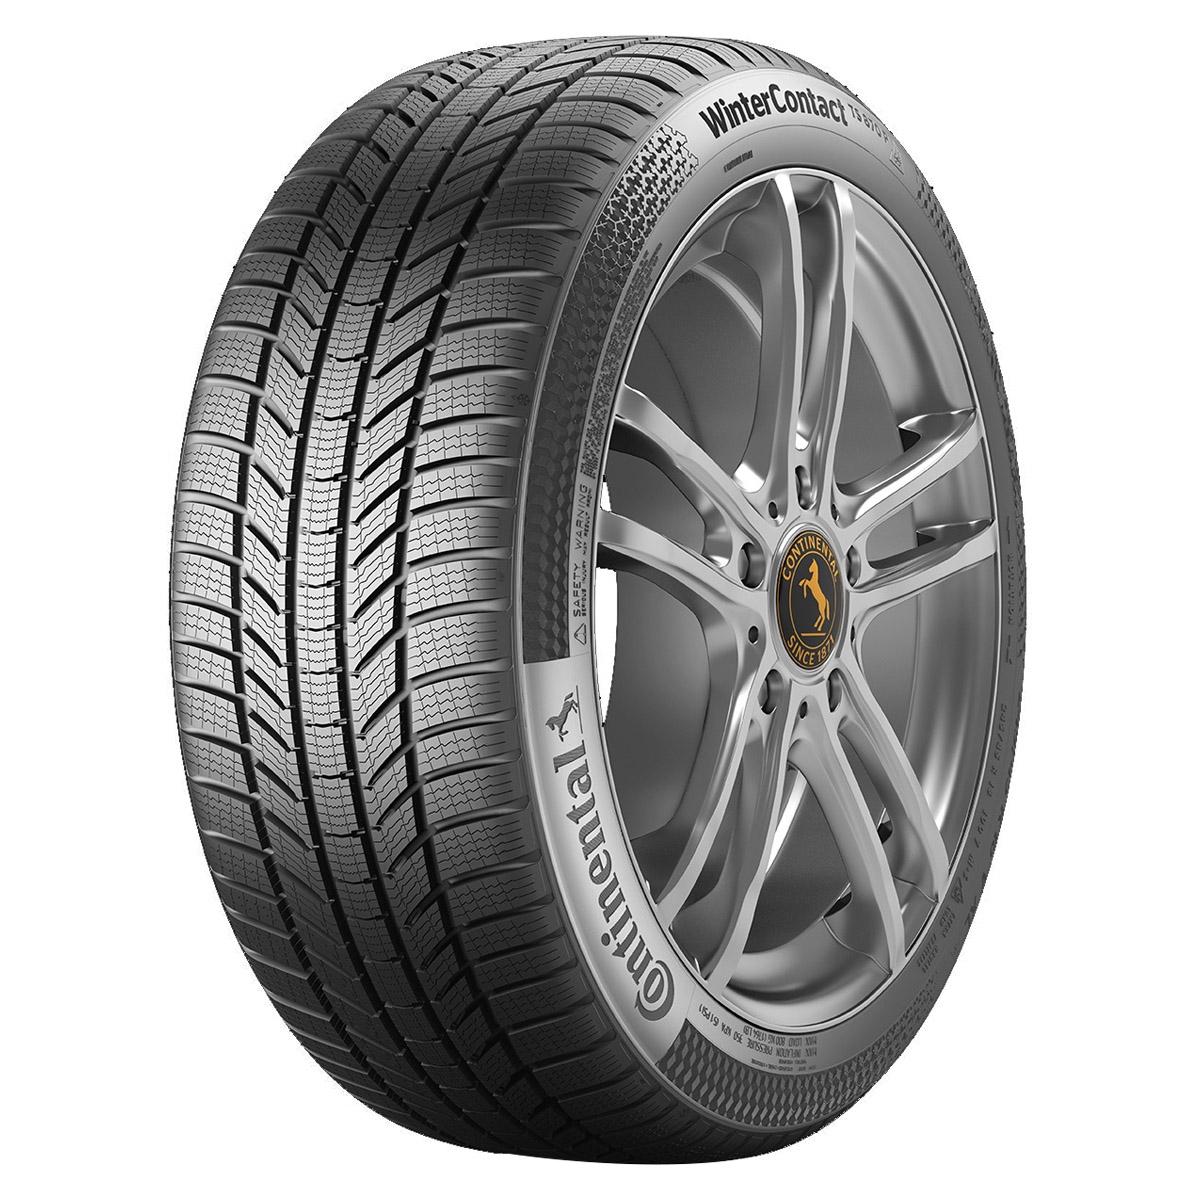 Anvelope iarna CONTINENTAL WINTER CONTACT TS870 P 215/70 R16 100T